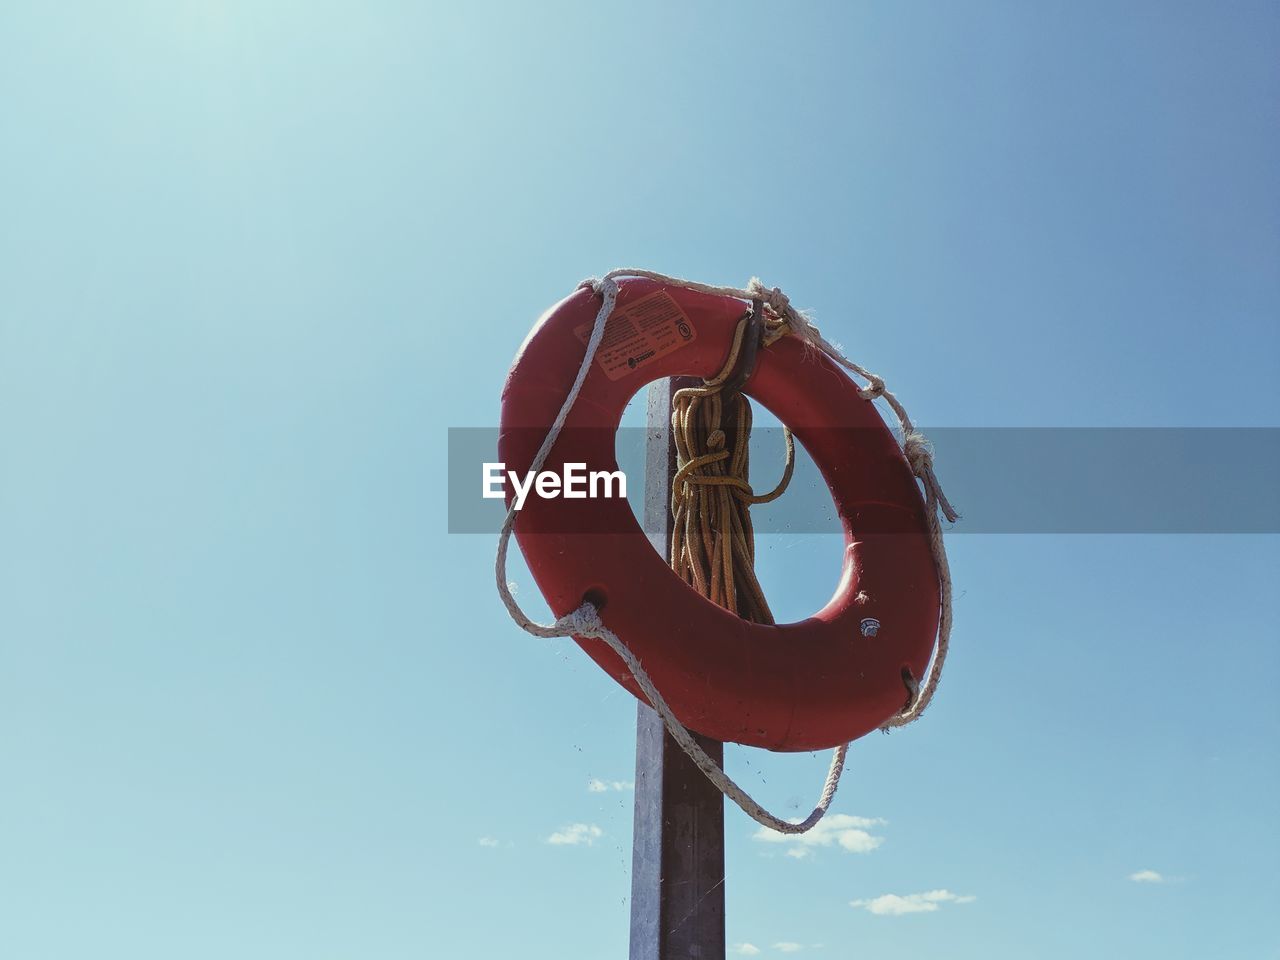 Lifesaver buoy hung in the sky